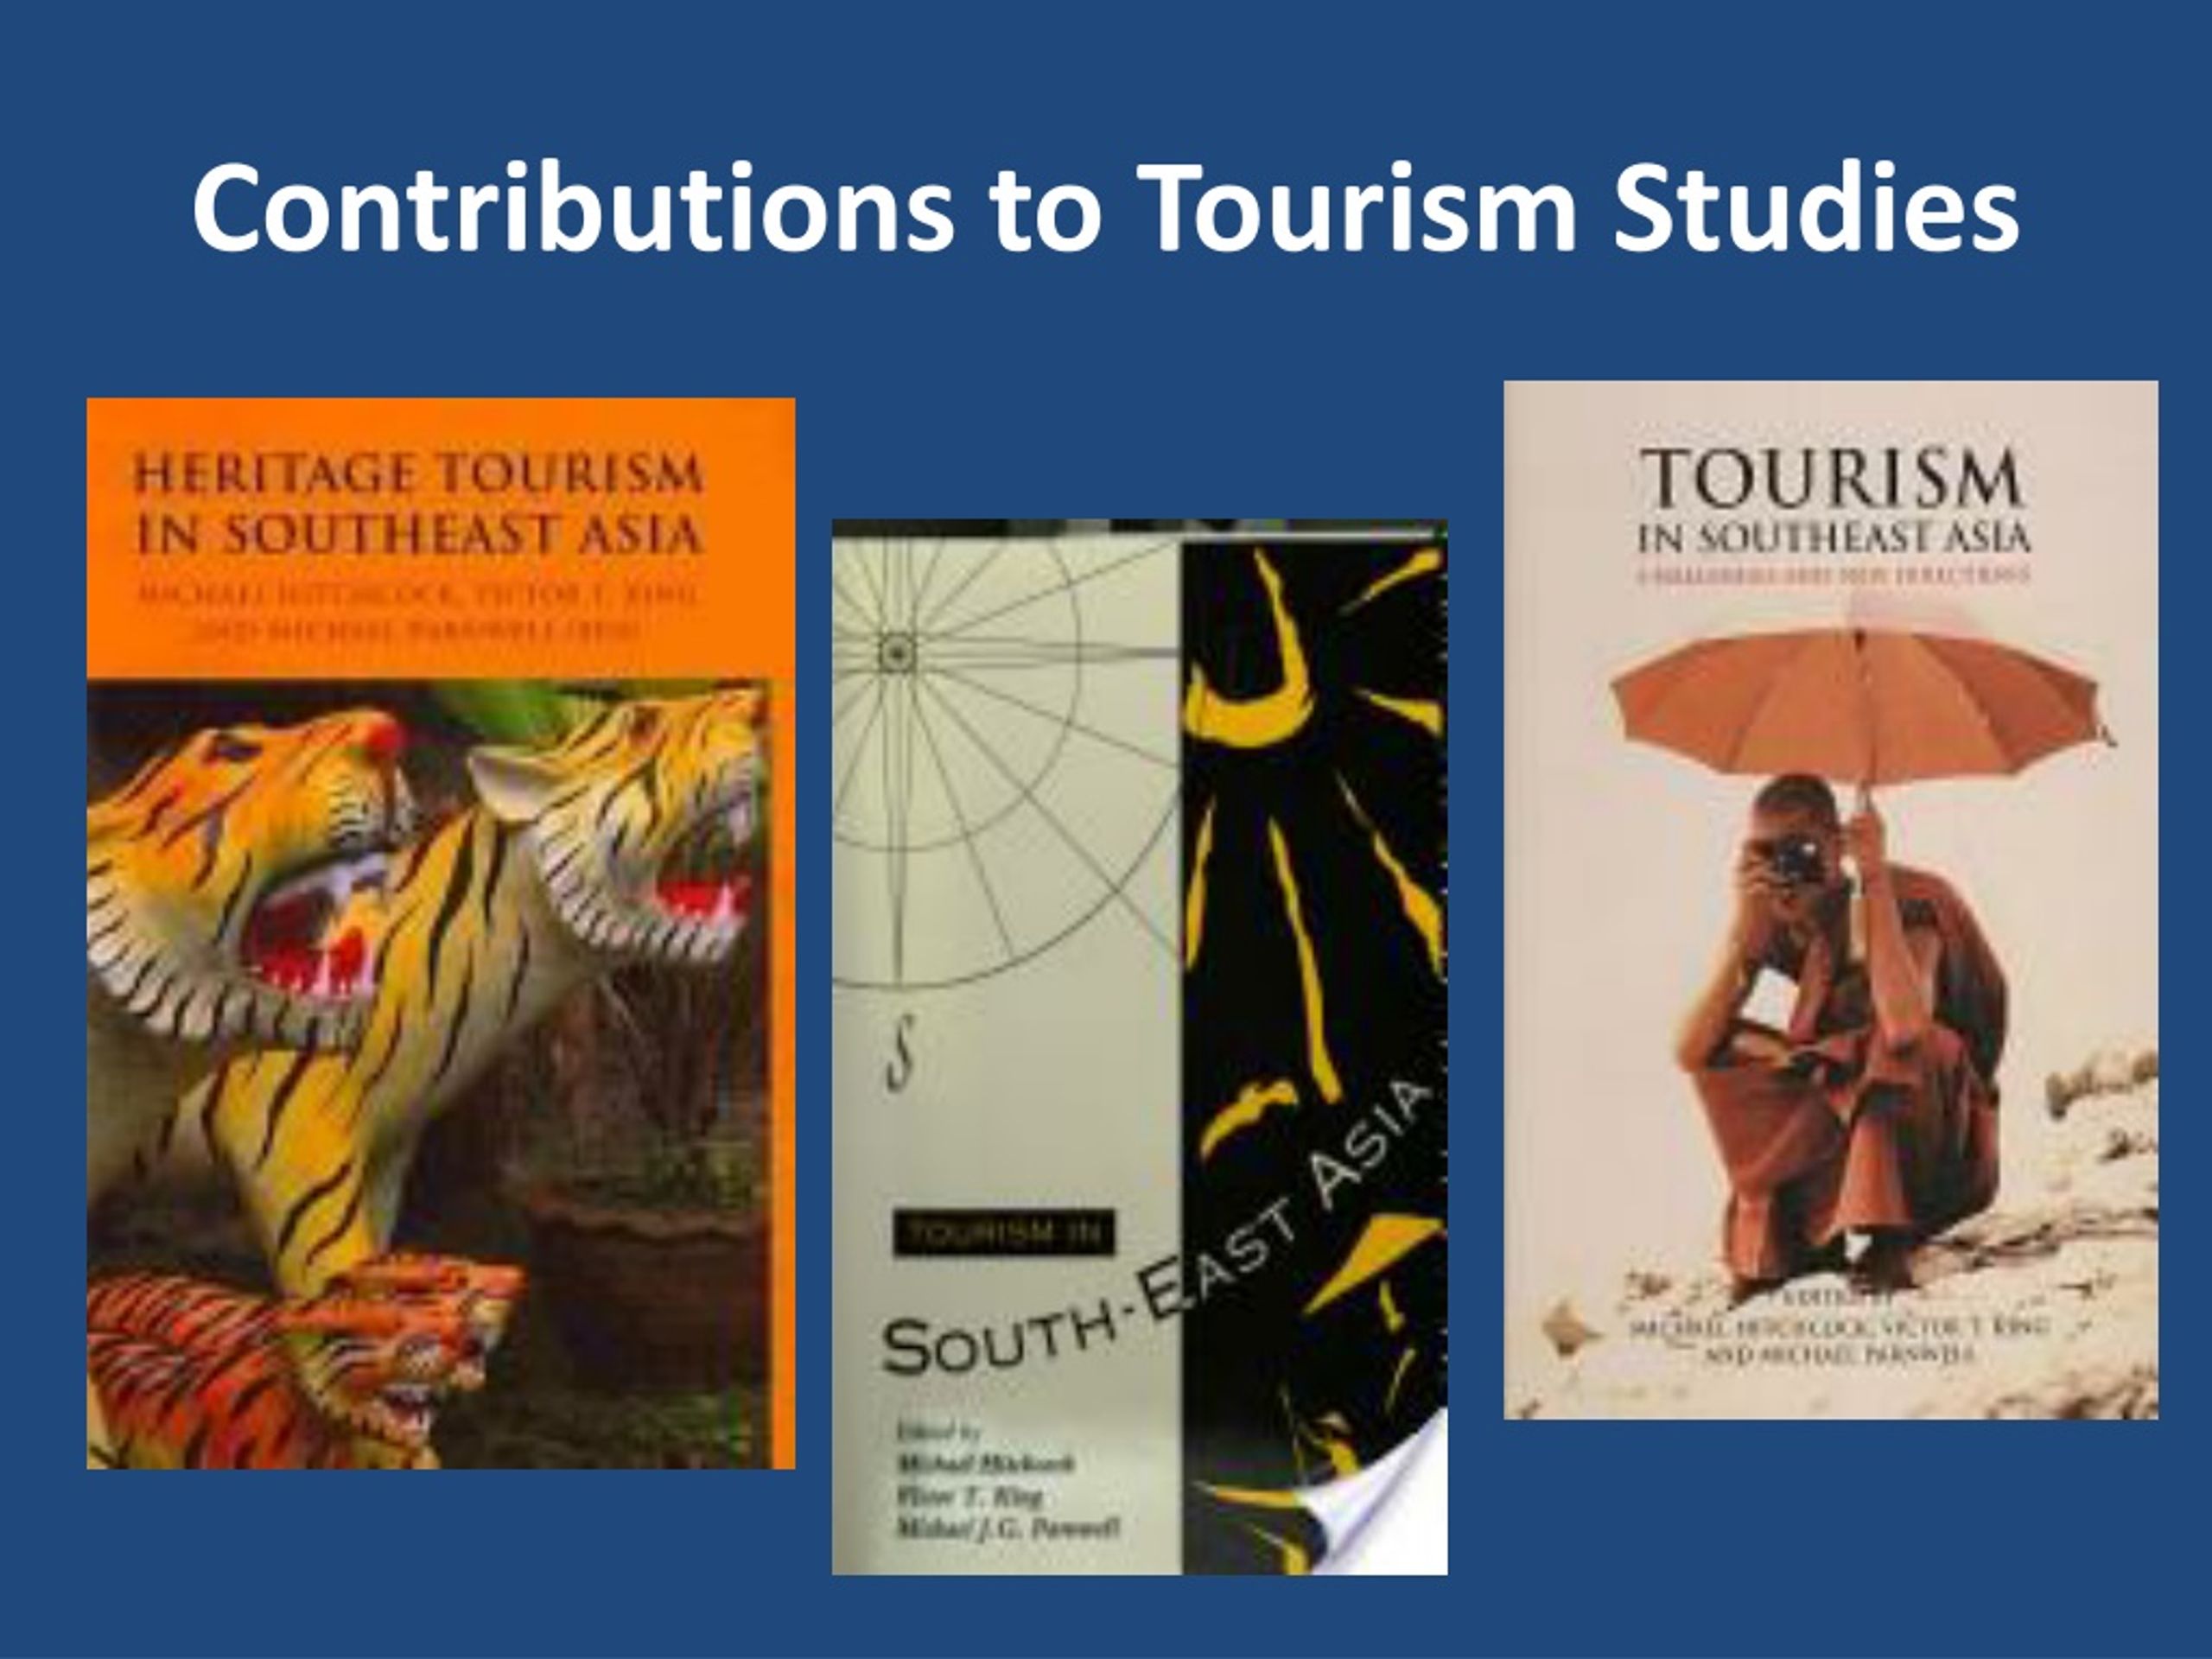 research about the tourism